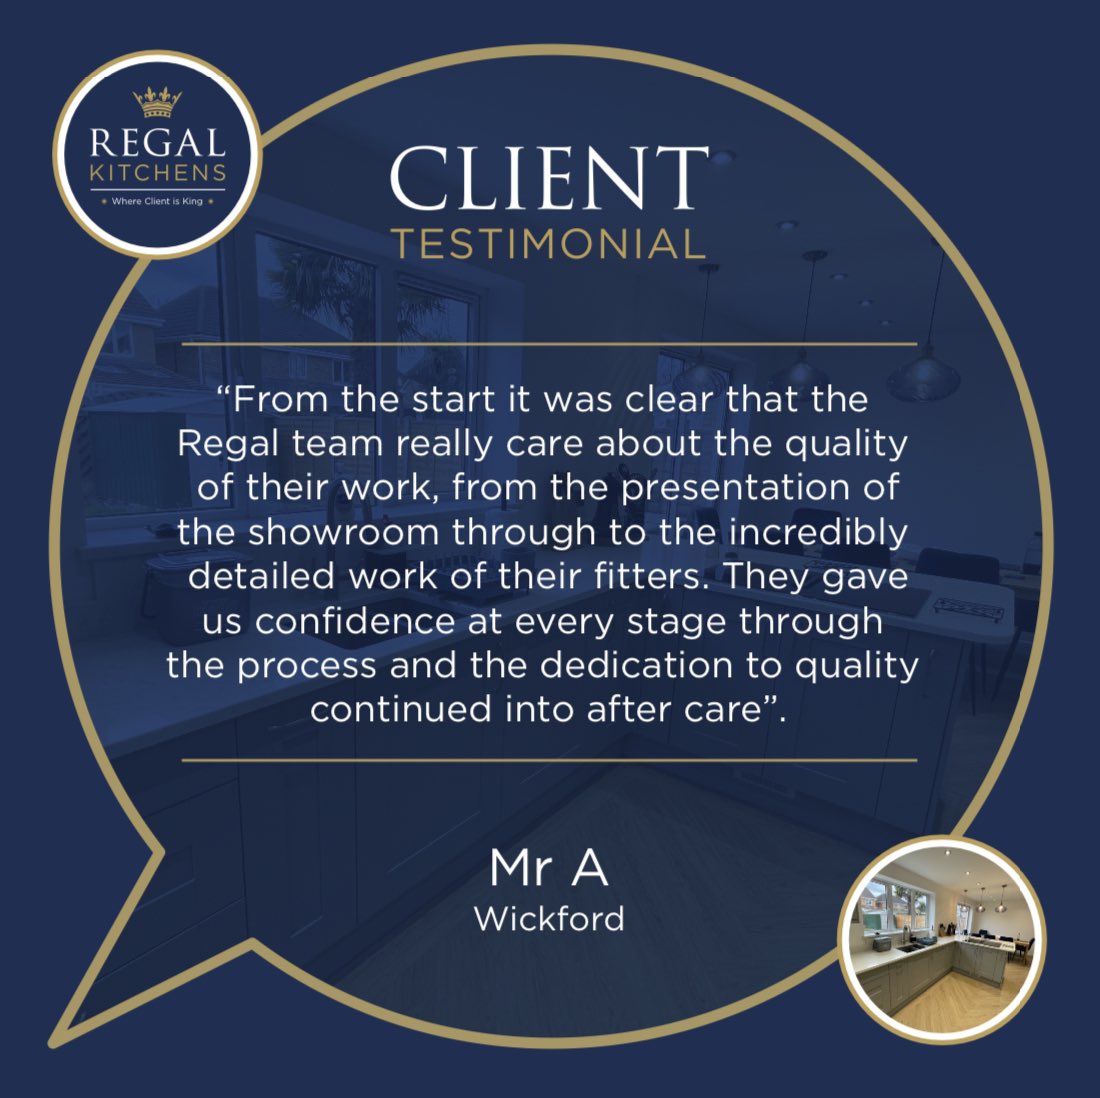 #testimonialtuesday

We pride ourselves on our customer service, so we love it when our customers have had such a good experience they want to let others know by leaving us an online review.
📞 01245 351151
🖥️ regalkitchens.co.uk 
#whereclientisking #CustomerService